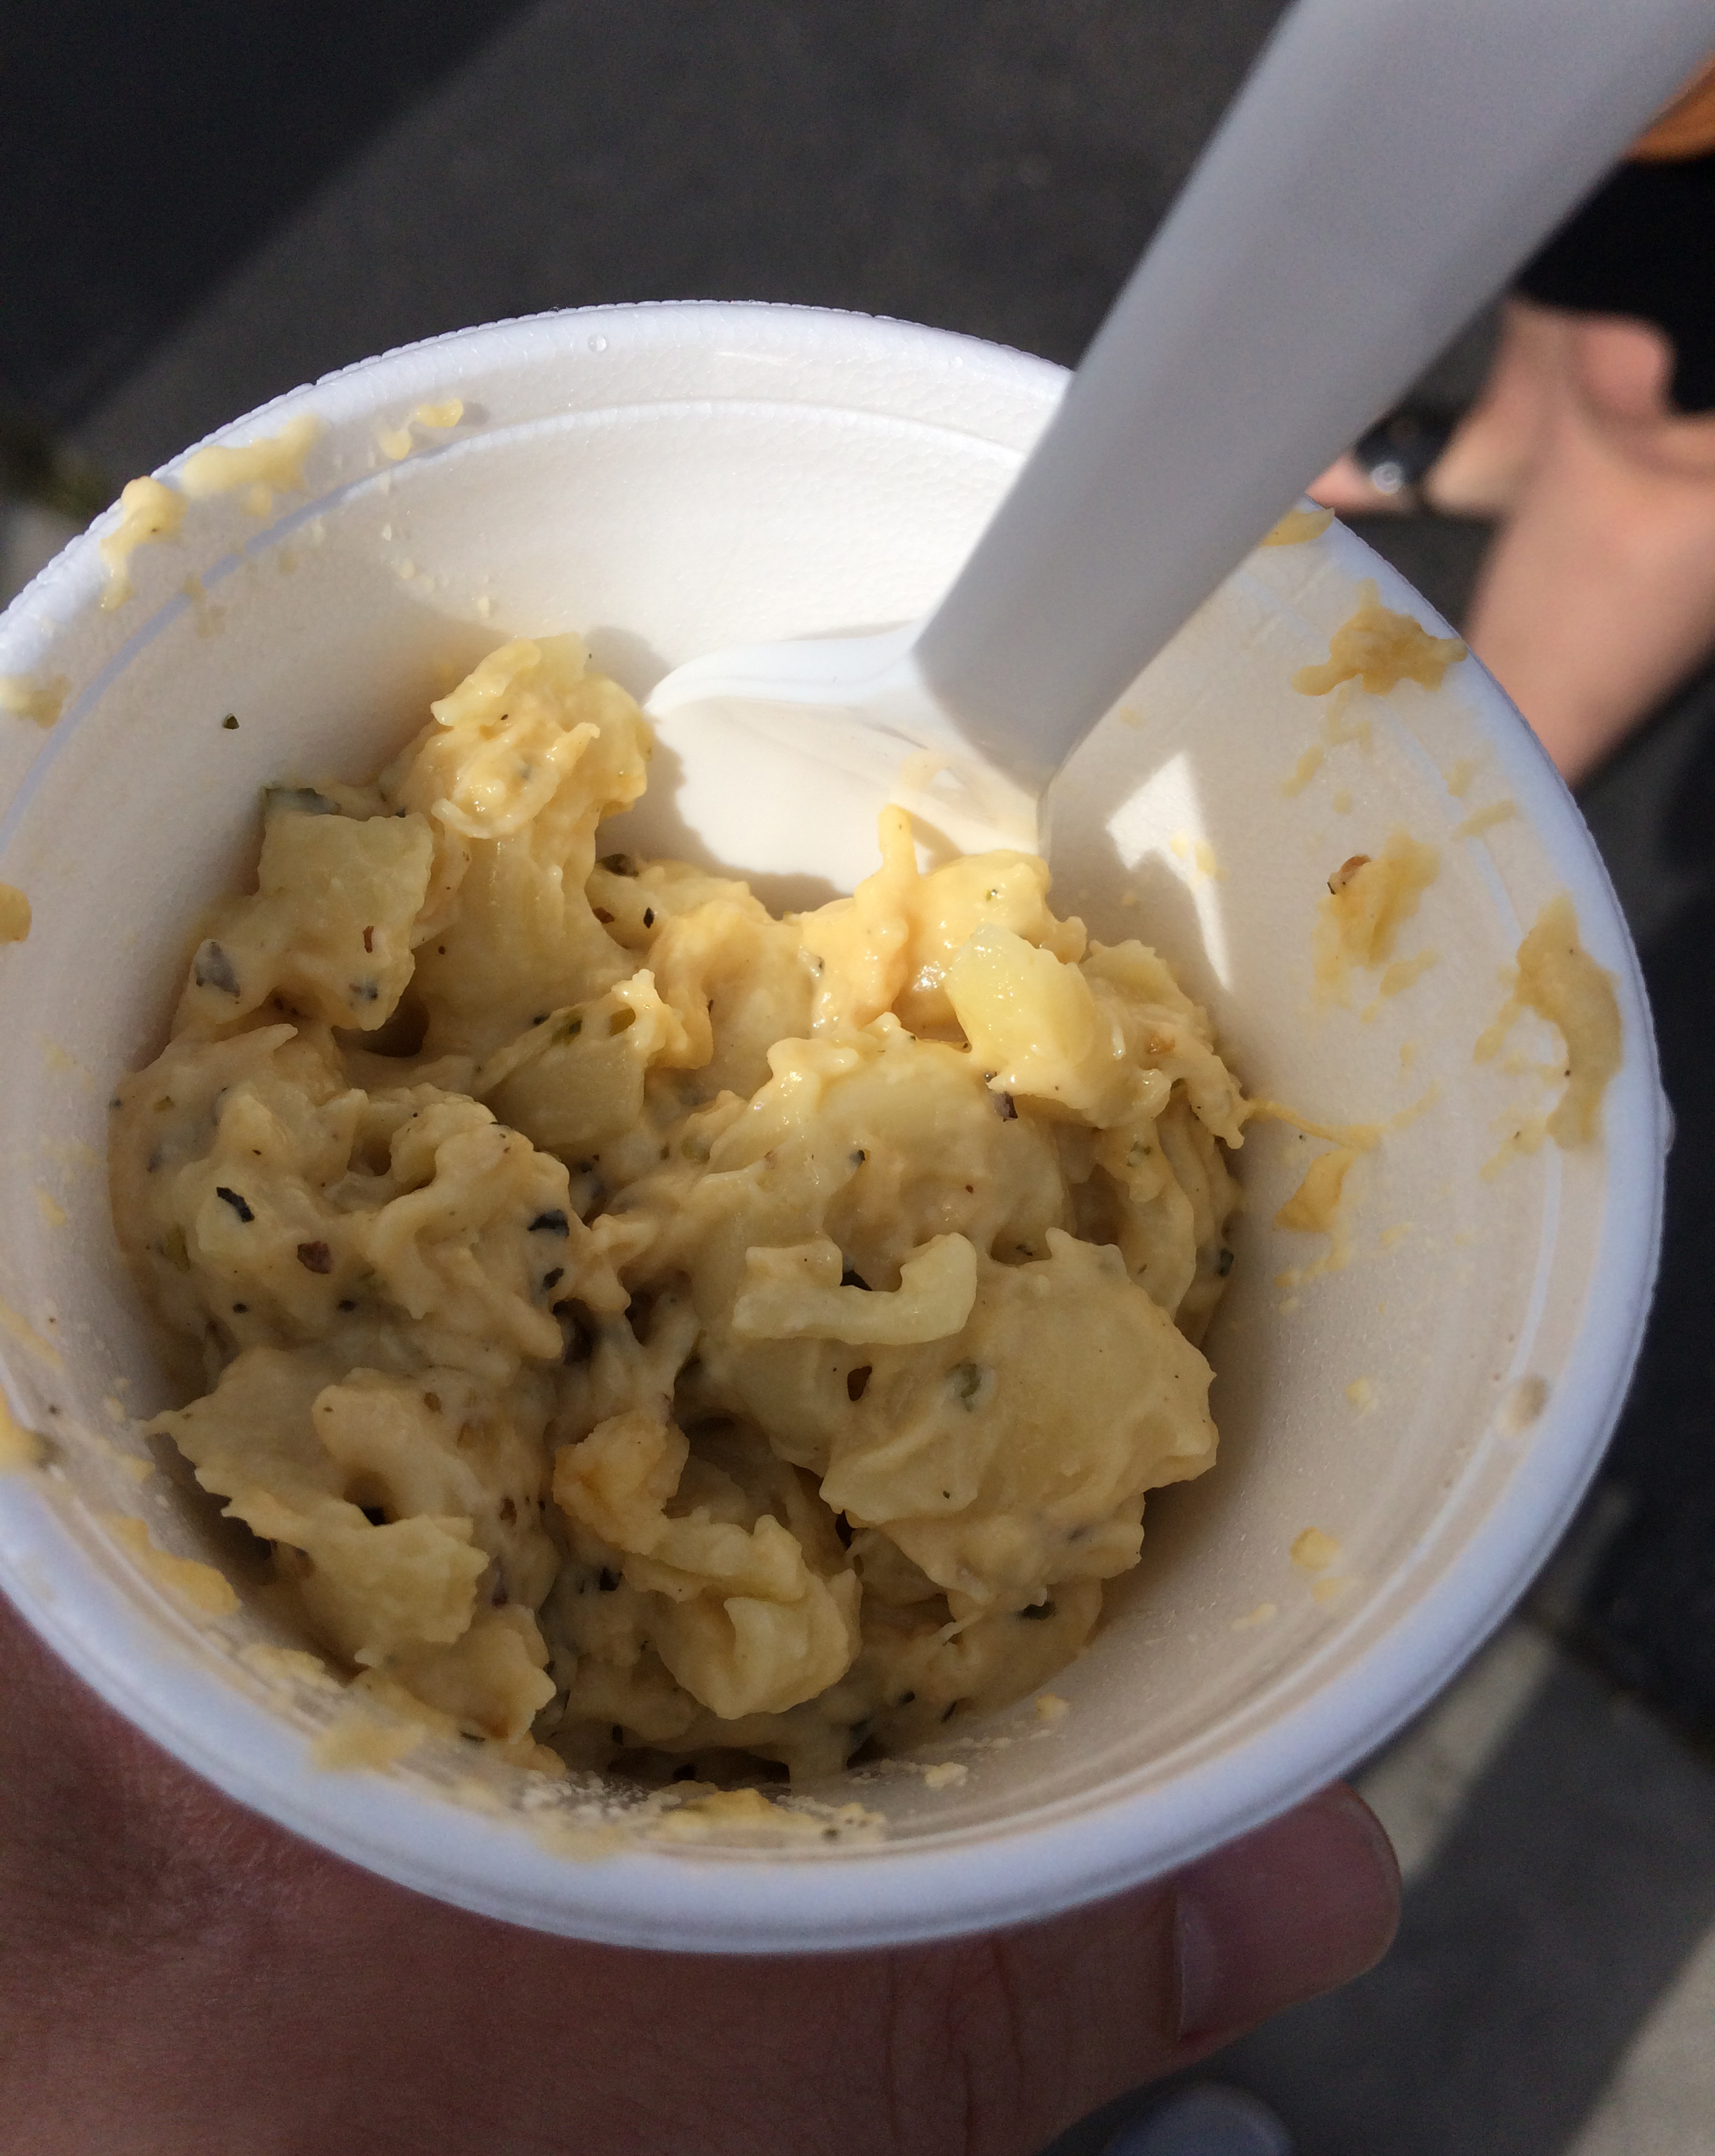 This chicken mac and cheese was incredible. It had terrific seasoning and was one of my favorites at the Surf Dreams Foundation Mac-N-Cheese Cook Off